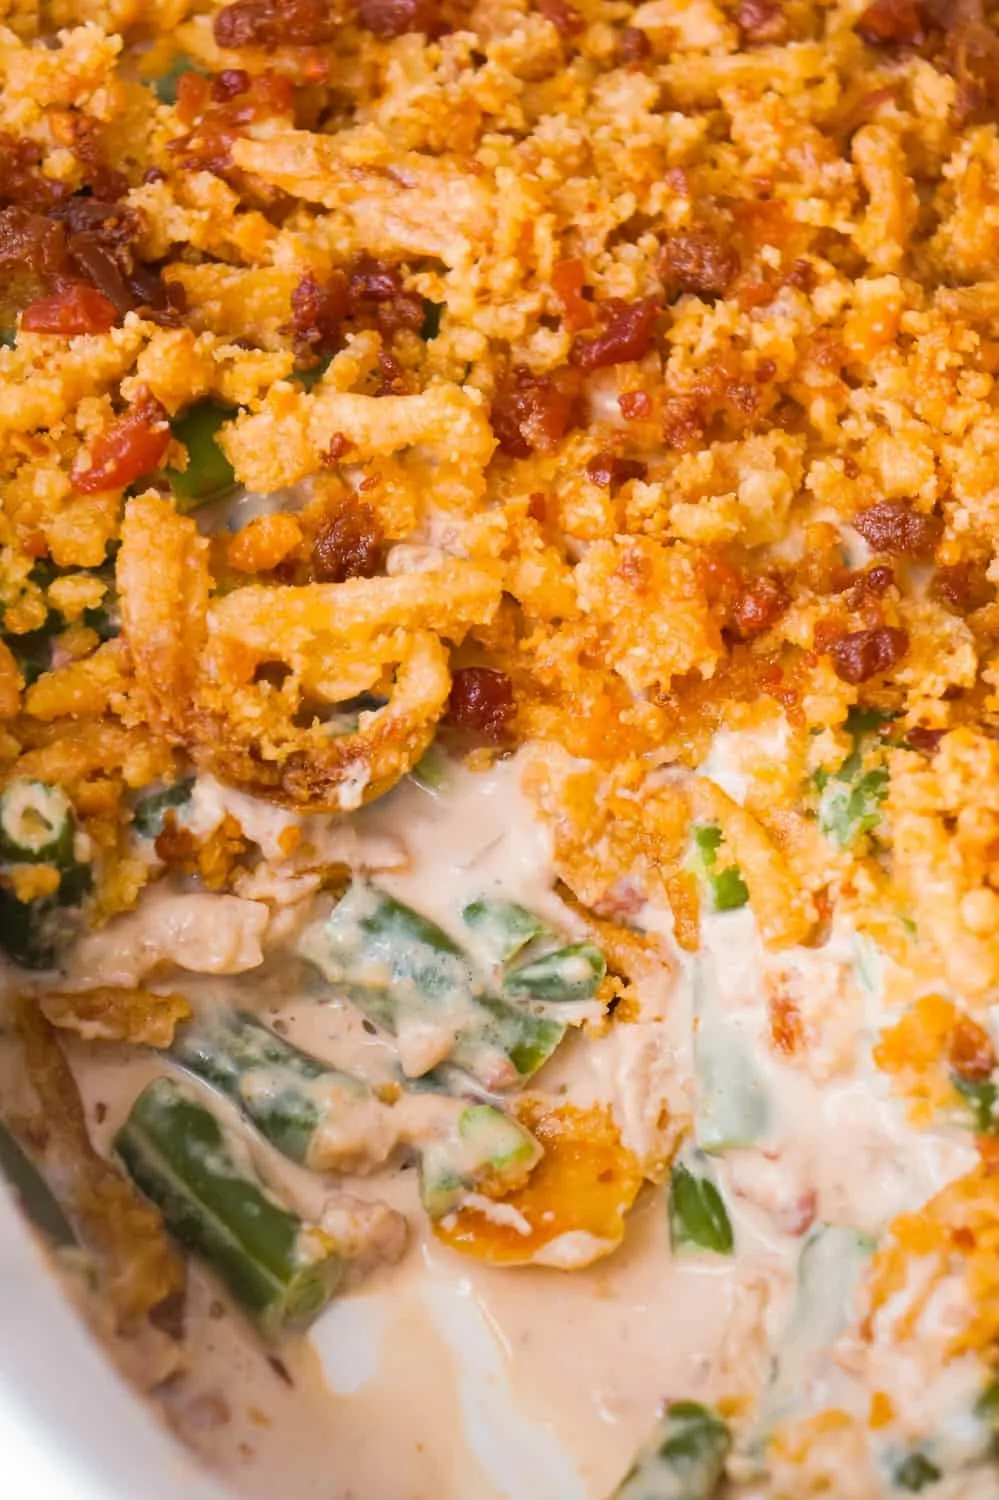 Cream Cheese and Bacon Green Bean Casserole is an easy side dish recipe perfect for Thanksgiving or Christmas. This creamy green bean casserole is loaded with real bacon bits and topped with Ritz Crackers and French's Fried Onions.